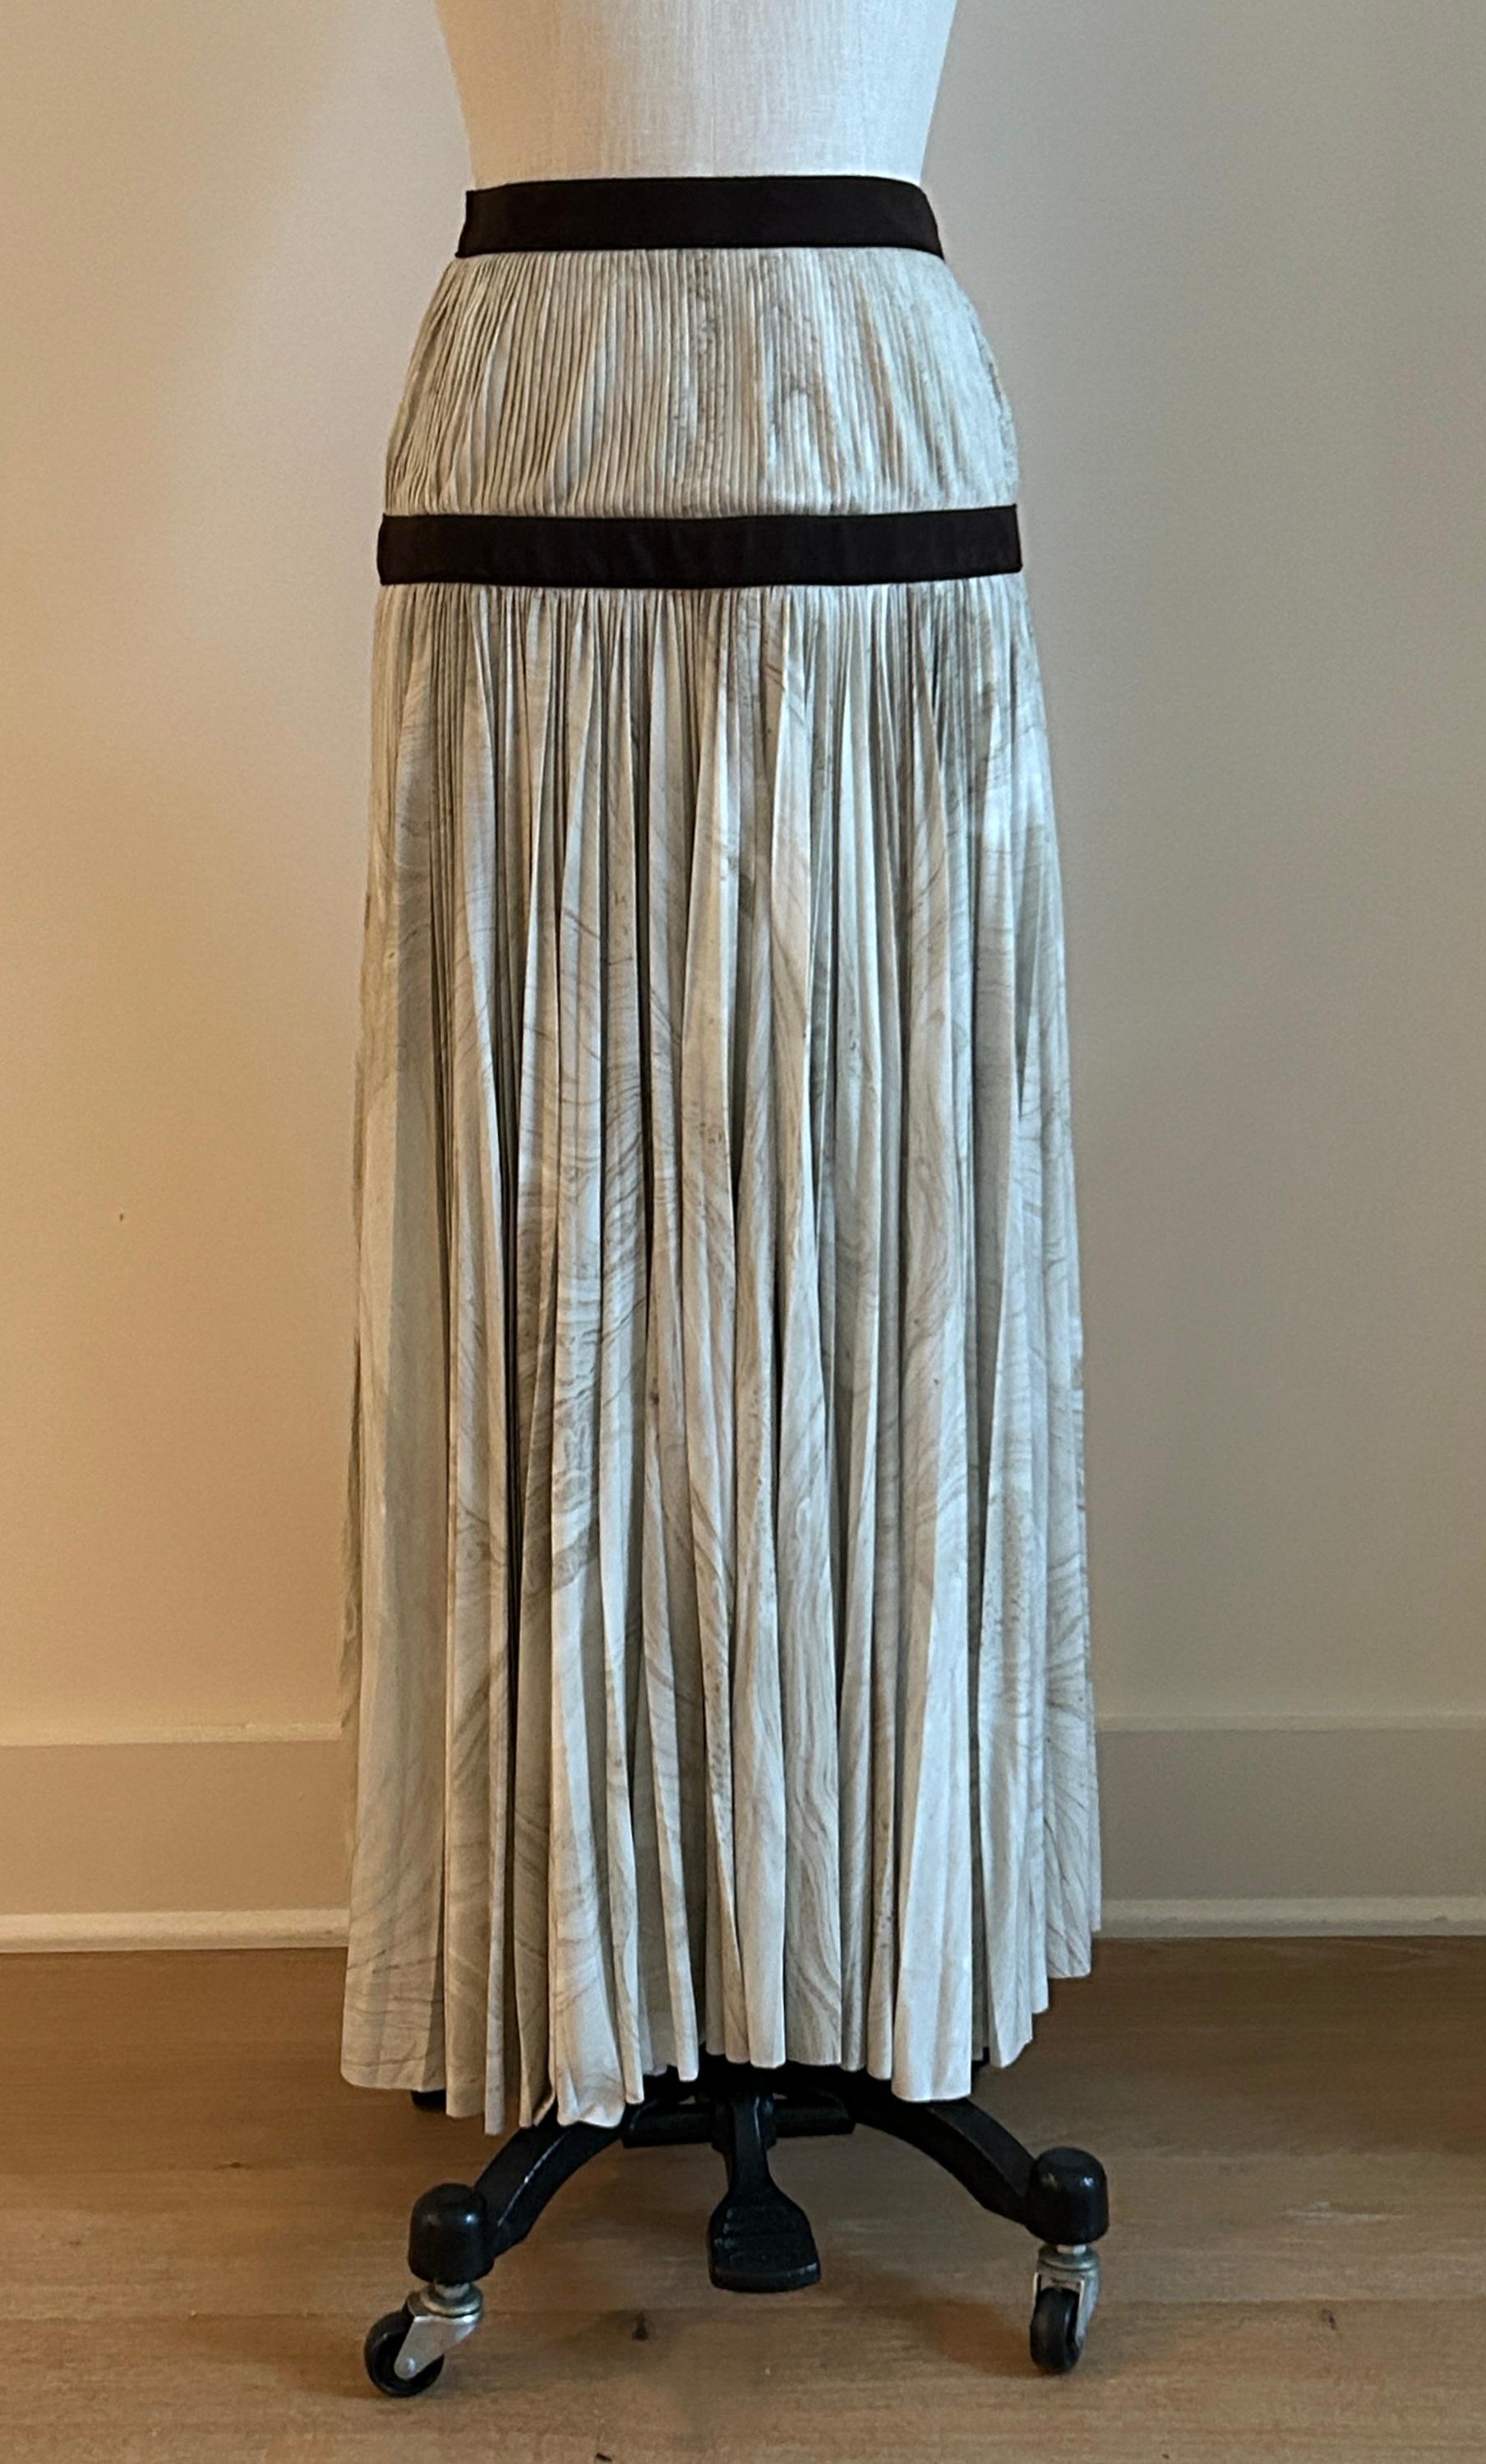 Alexander McQueen midi length pleated skirt from the Pre-Fall 2017 collection. Designer Sarah Burton drew inspiration for the collection from Cornwall's moors, legends, and the landscape-inspired work of sculptor Barbara Hepworth.  Print was seen in